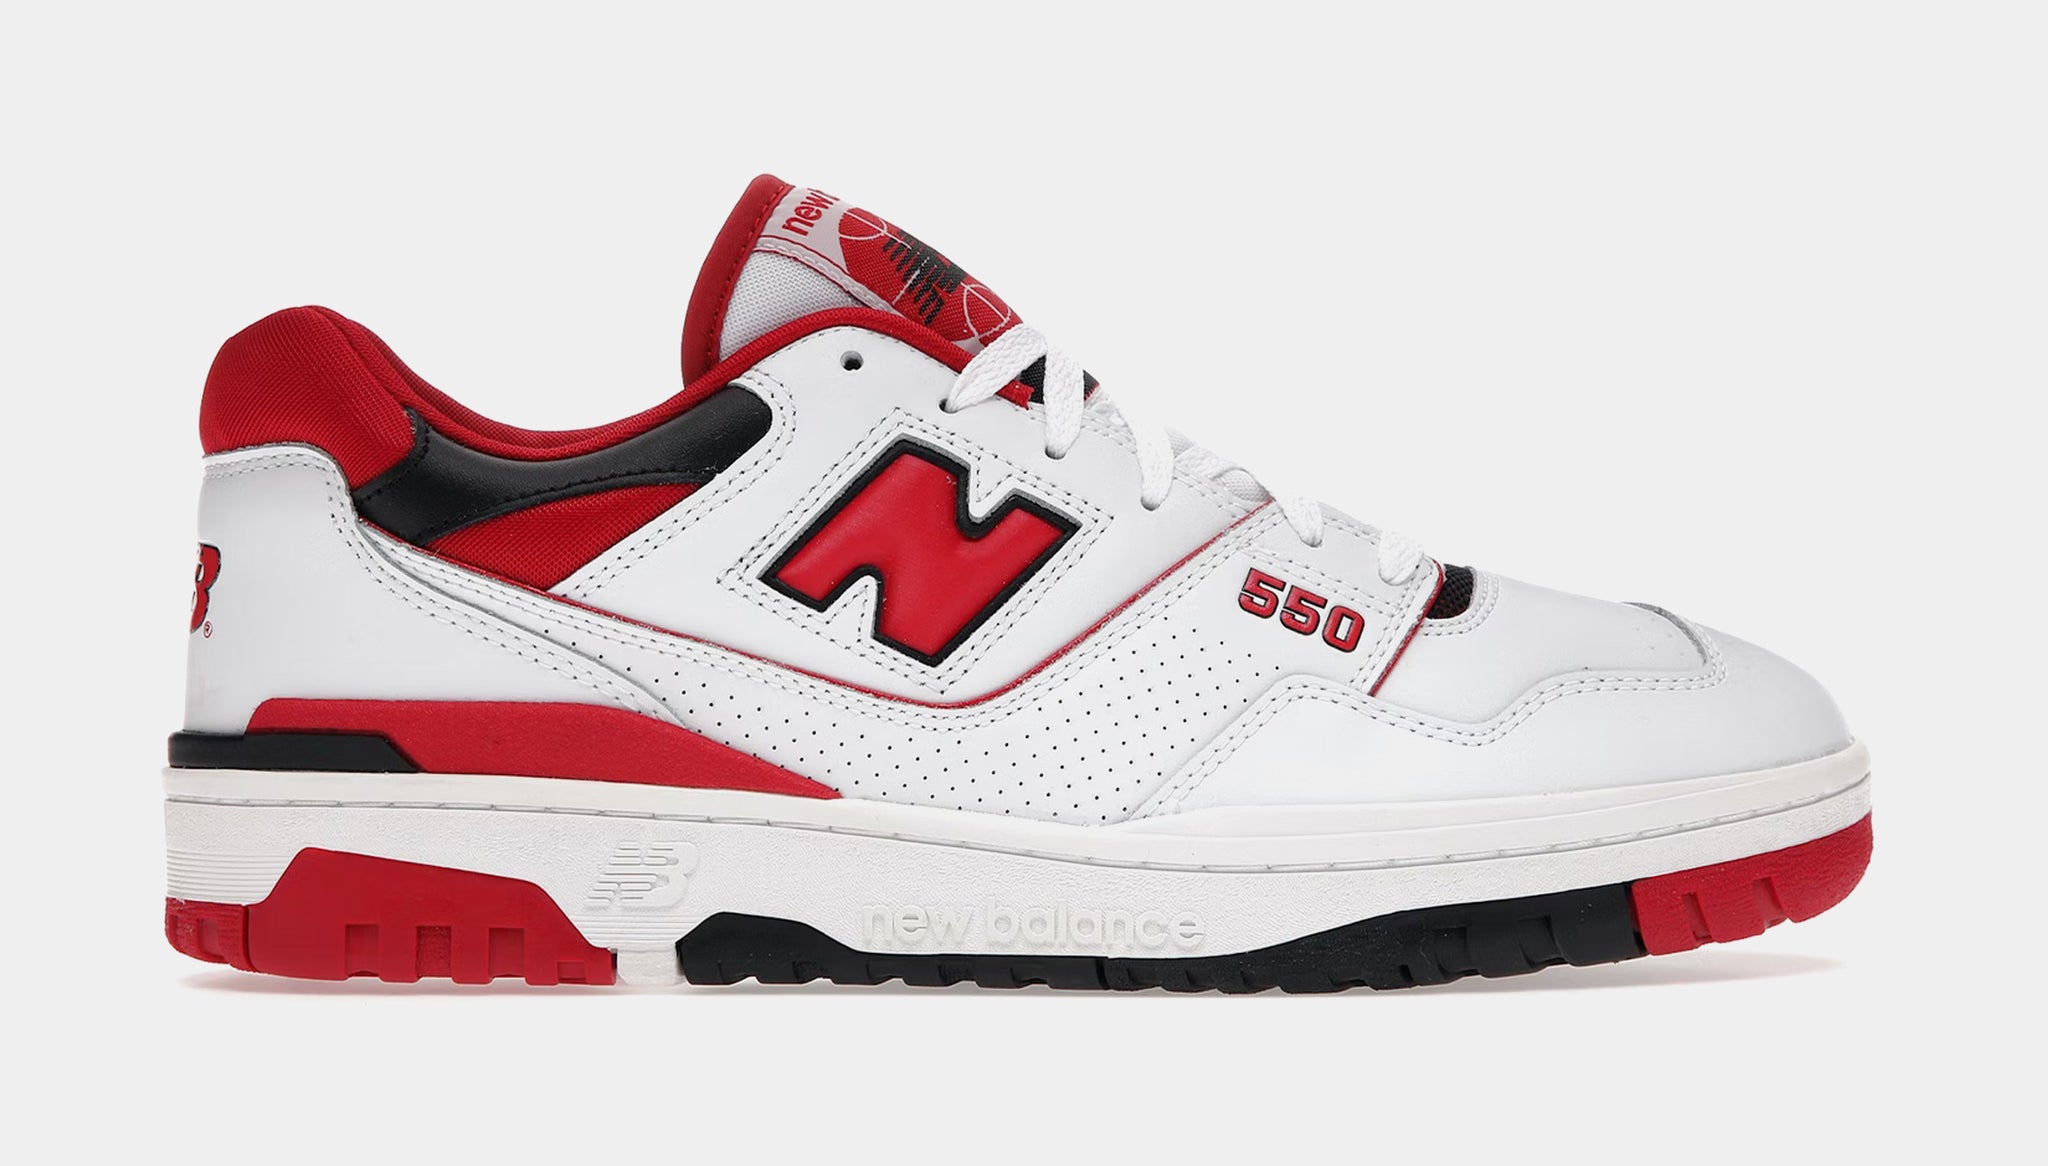 New Balance 550 - White/Red, Size 9.5 by Sneaker Politics